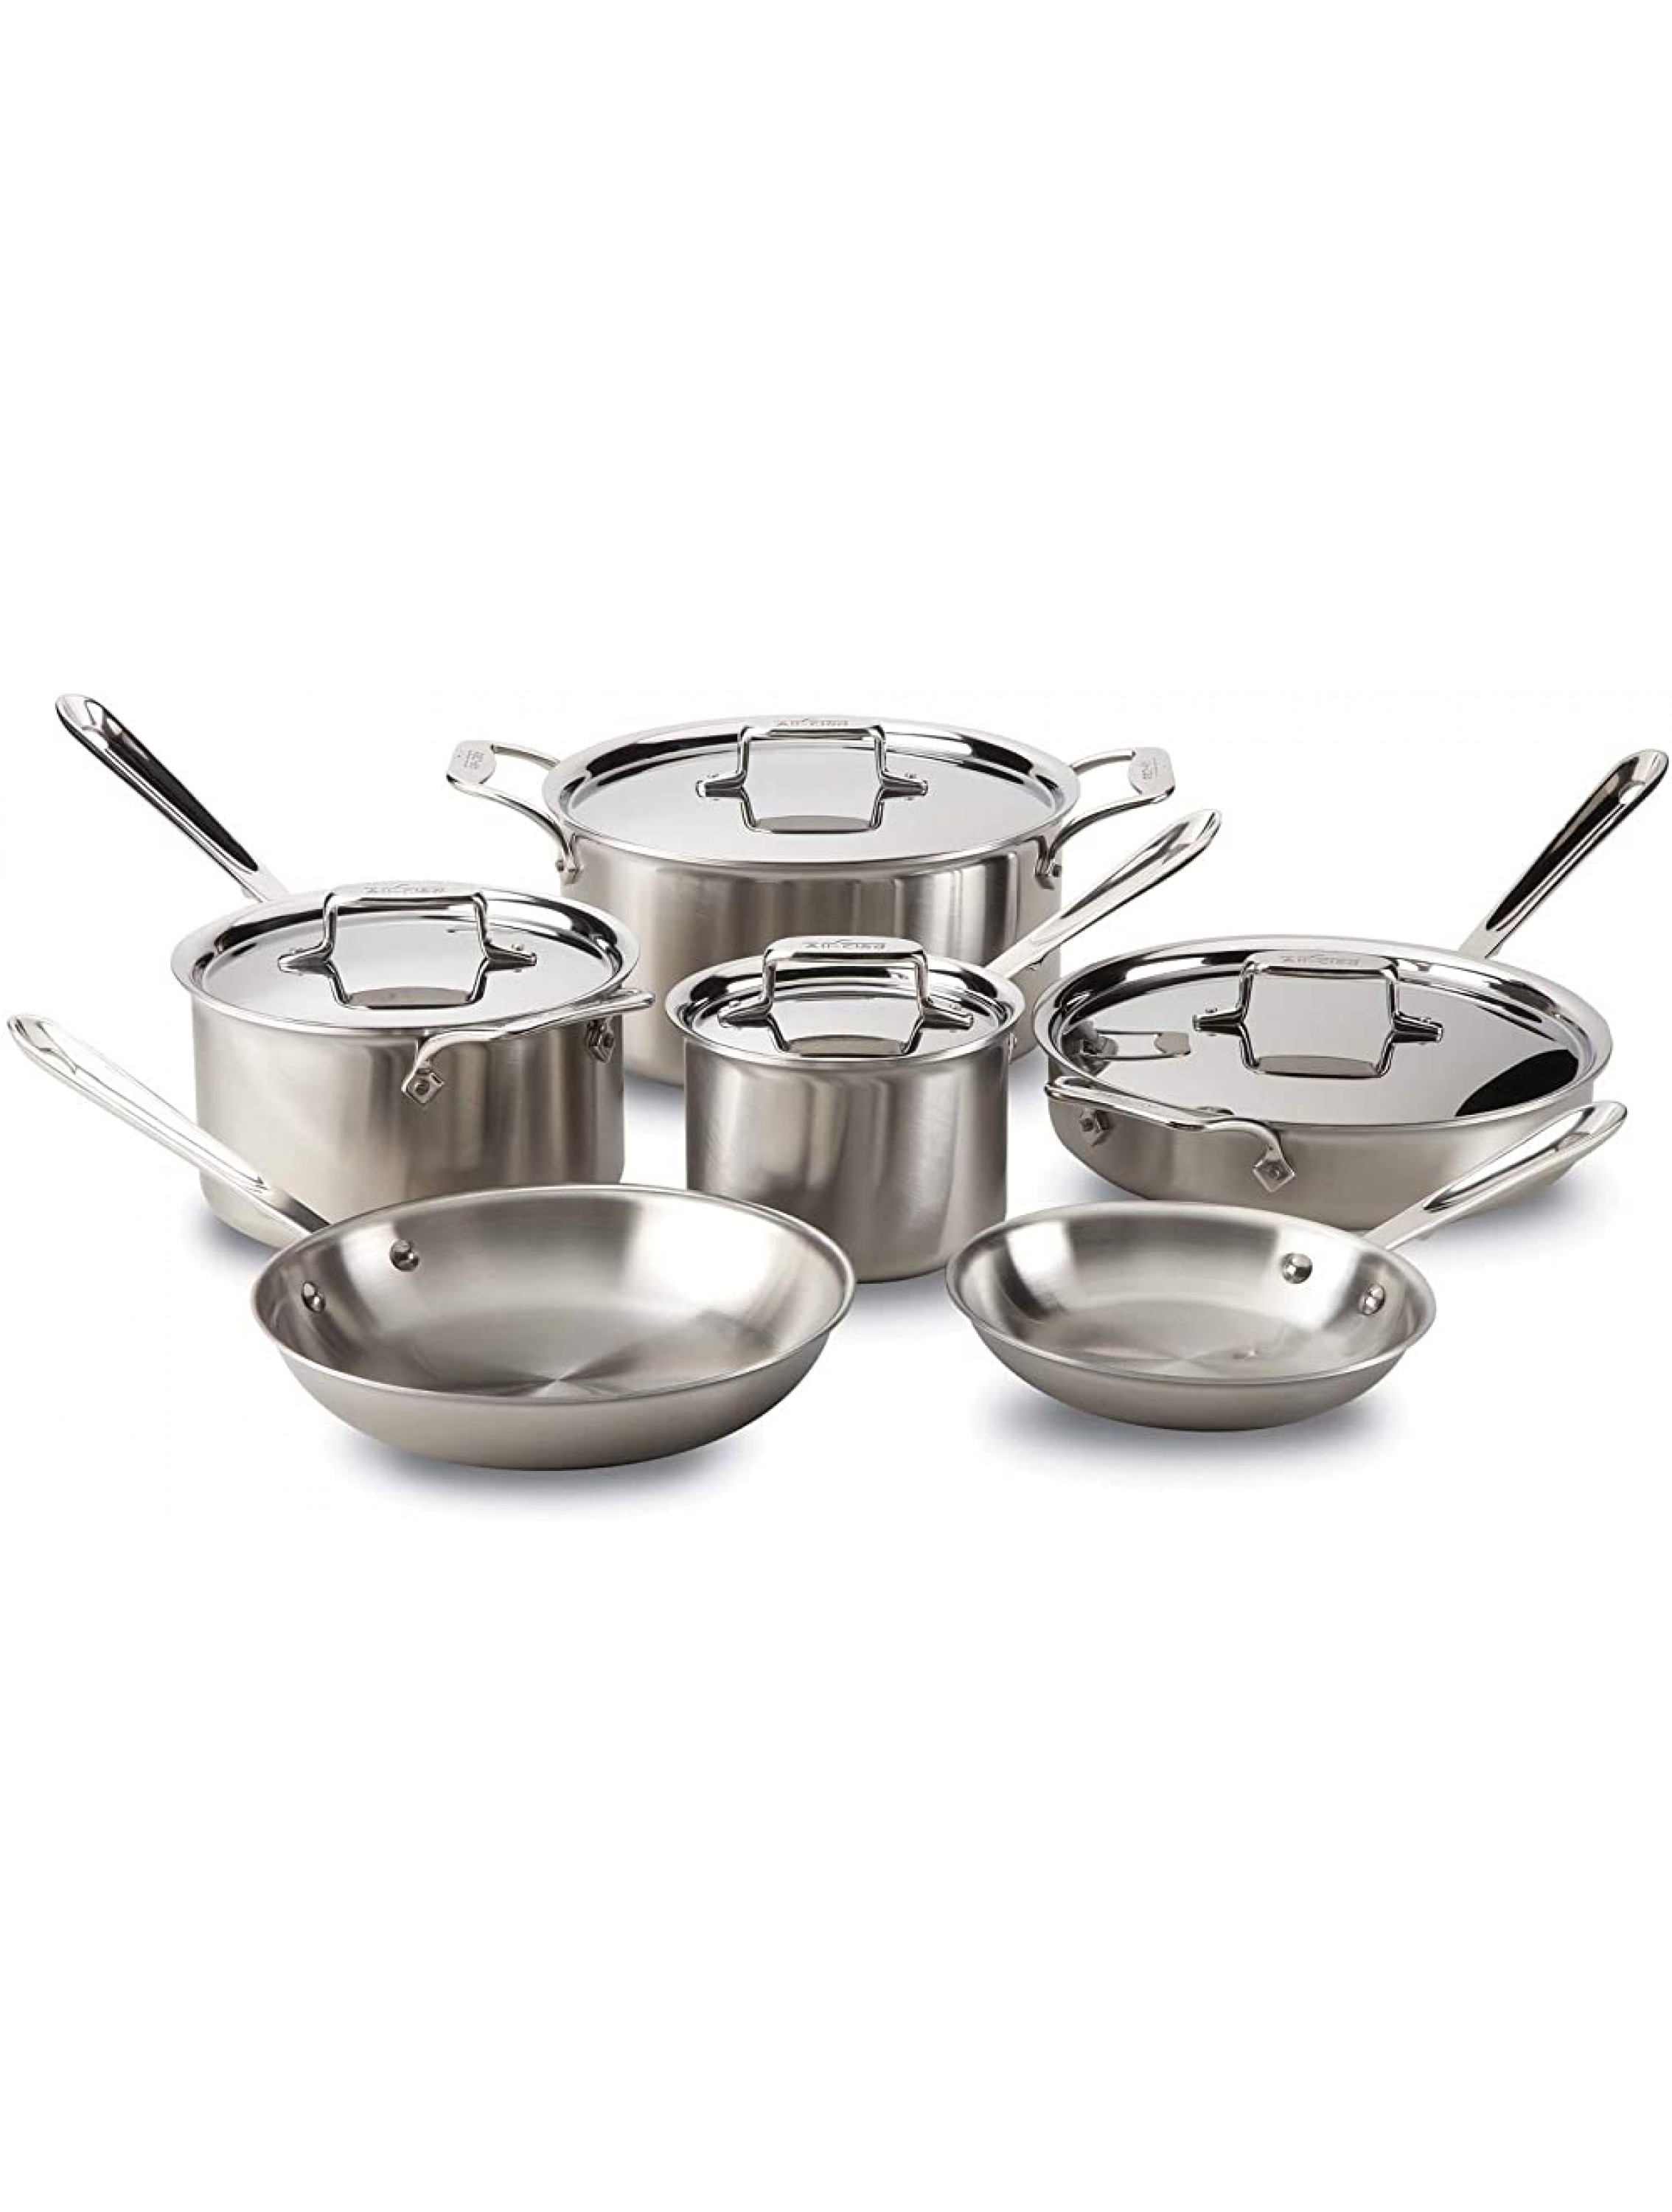 All-Clad Brushed D5 Stainless Cookware Set Pots and Pans 5-Ply Stainless Steel Professional Grade 10-Piece 8400001085 - B09QODYZO